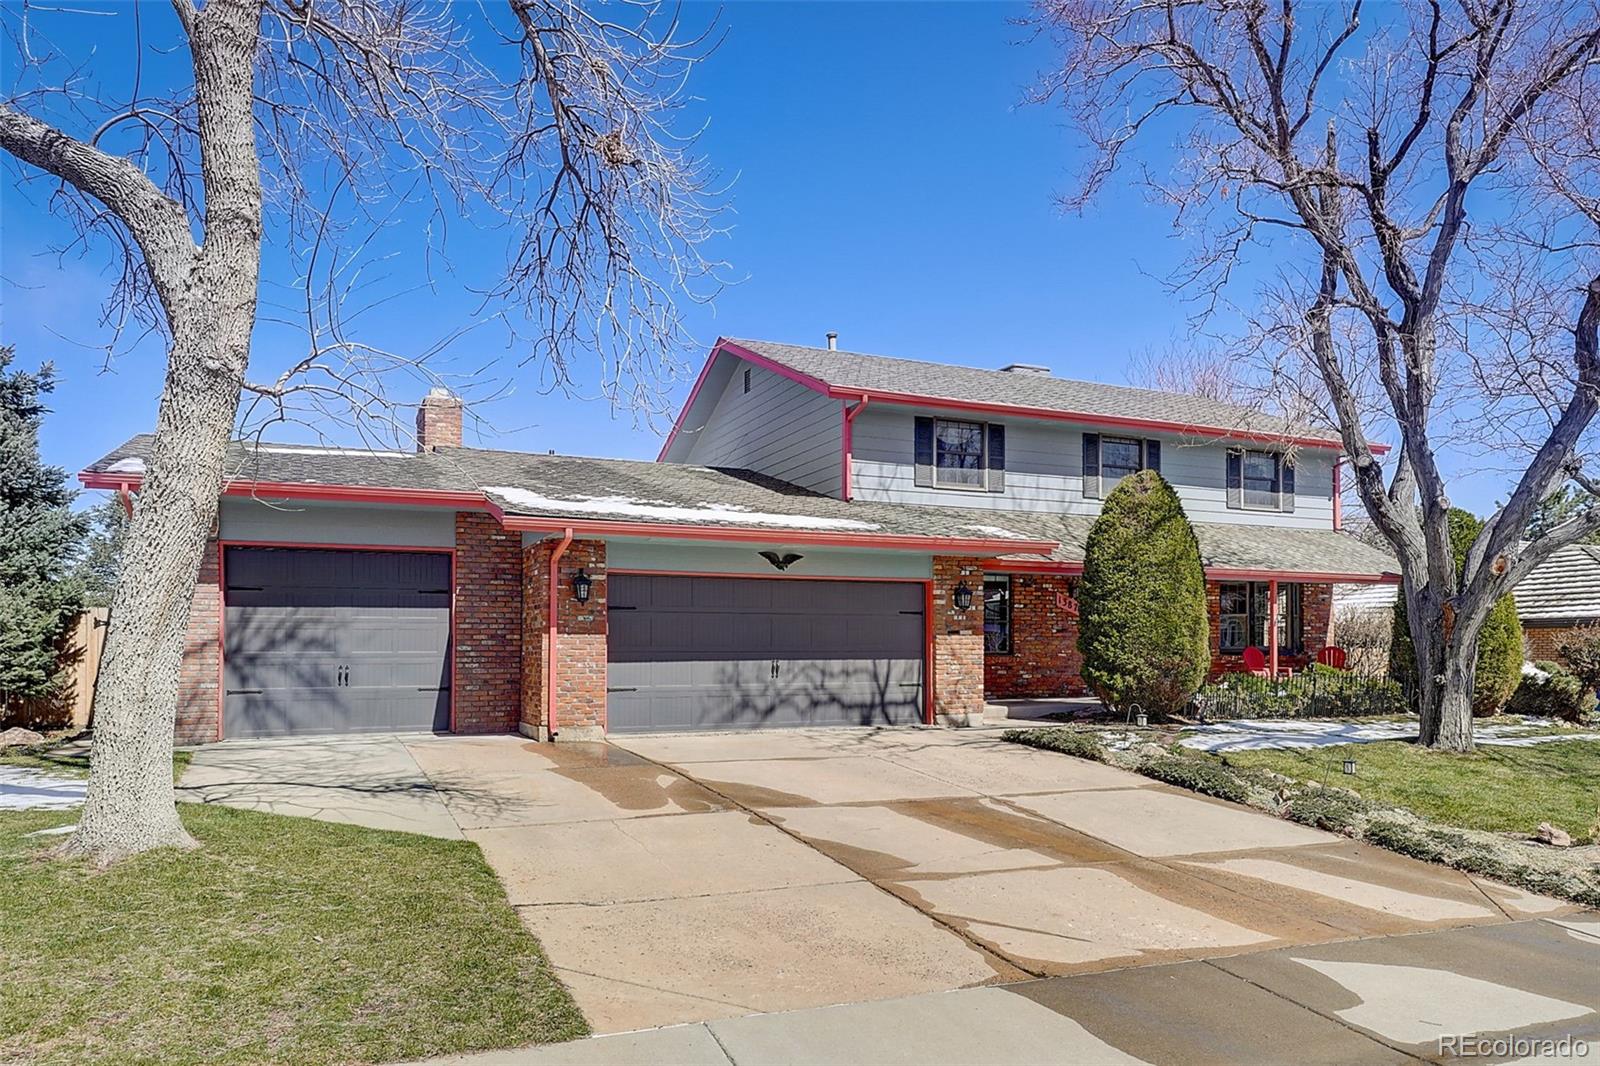 Report Image for 13877 W 3rd Place,Golden, Colorado